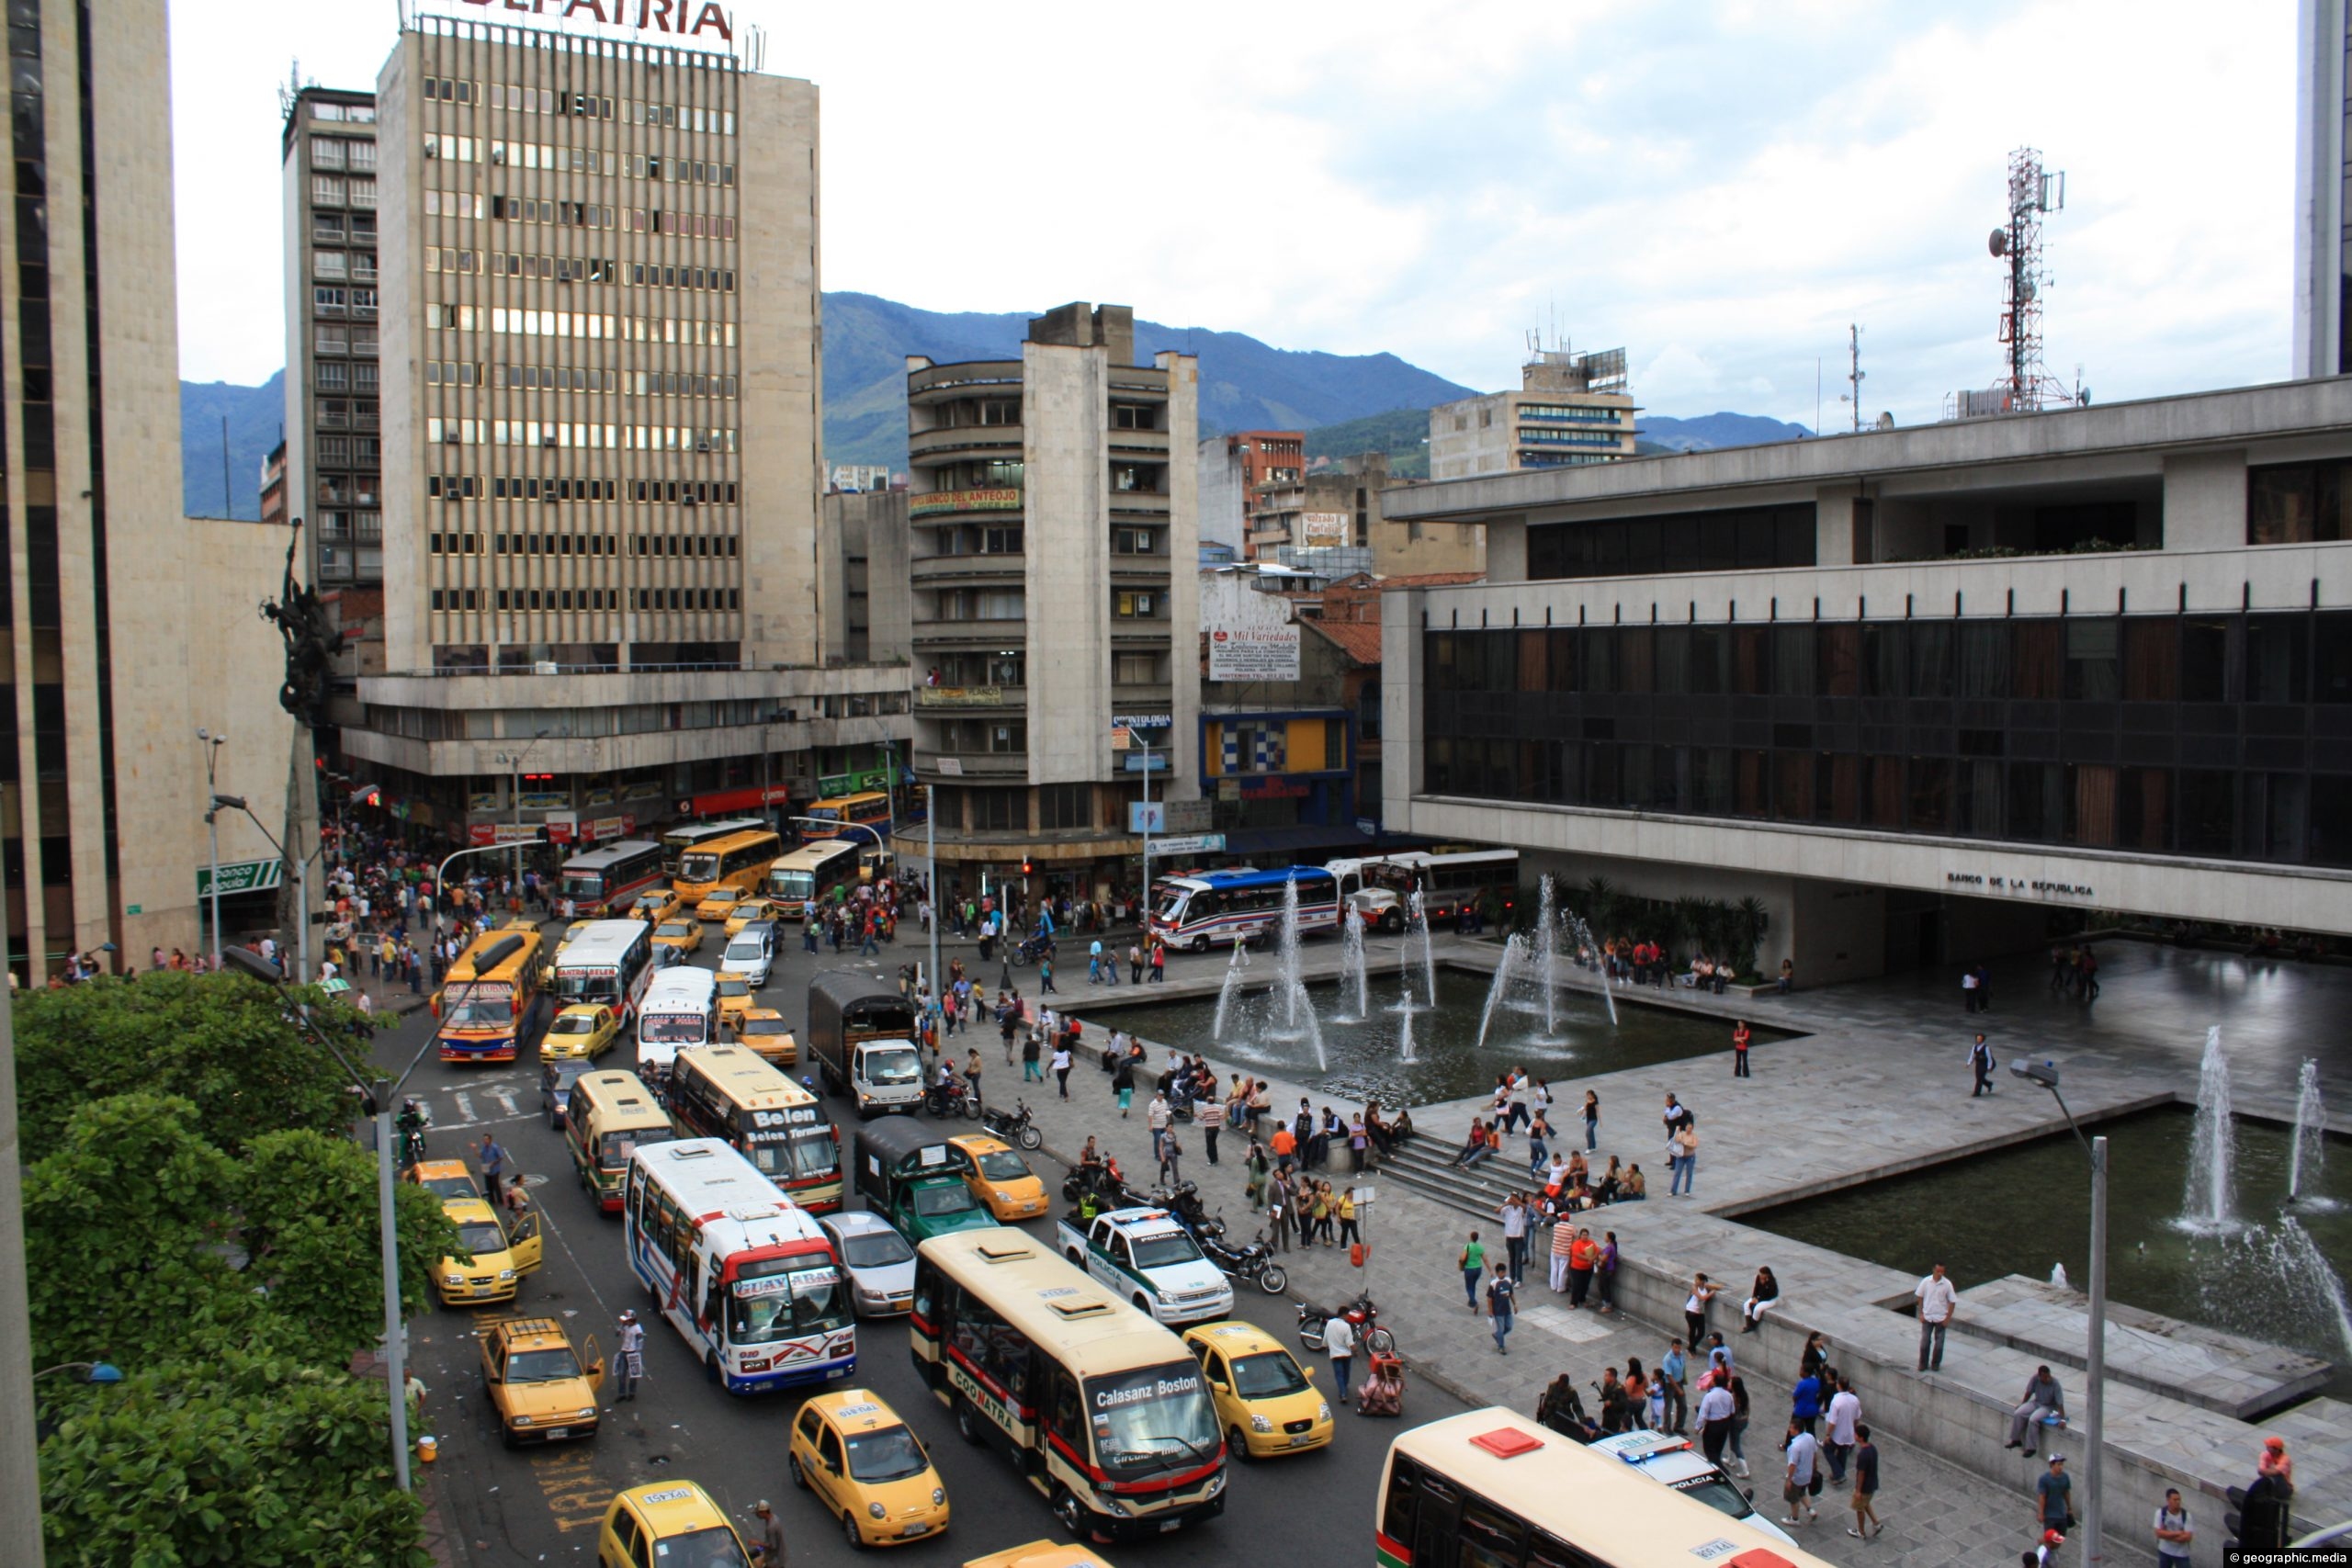 View of Avenida Colombia in Medellin's central business district